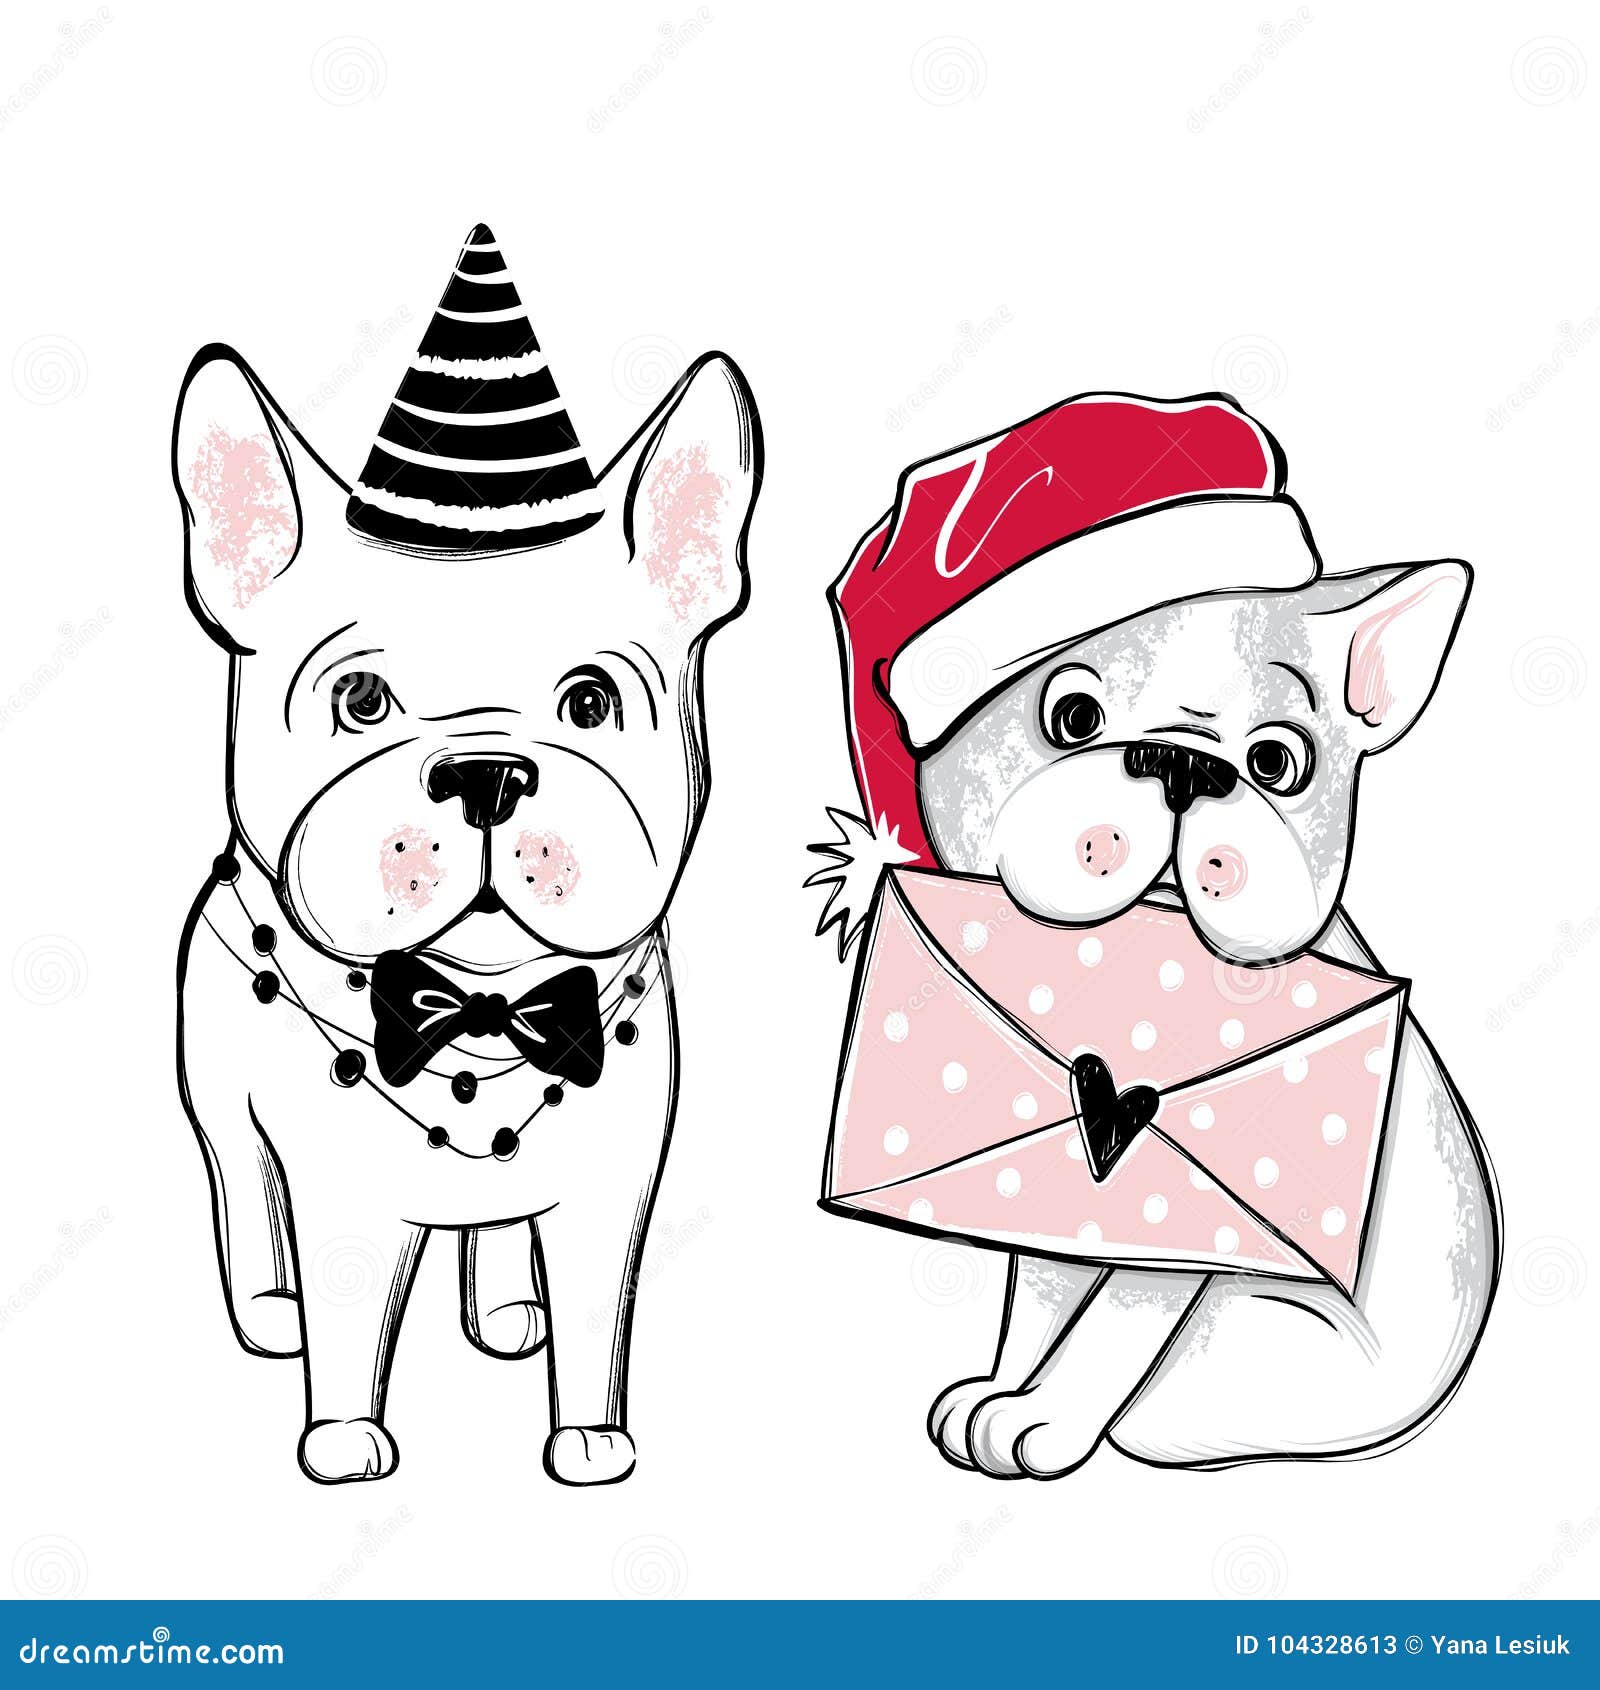 Download Merry Christmas Illustration With Funny Dog. Hand Drawn ...